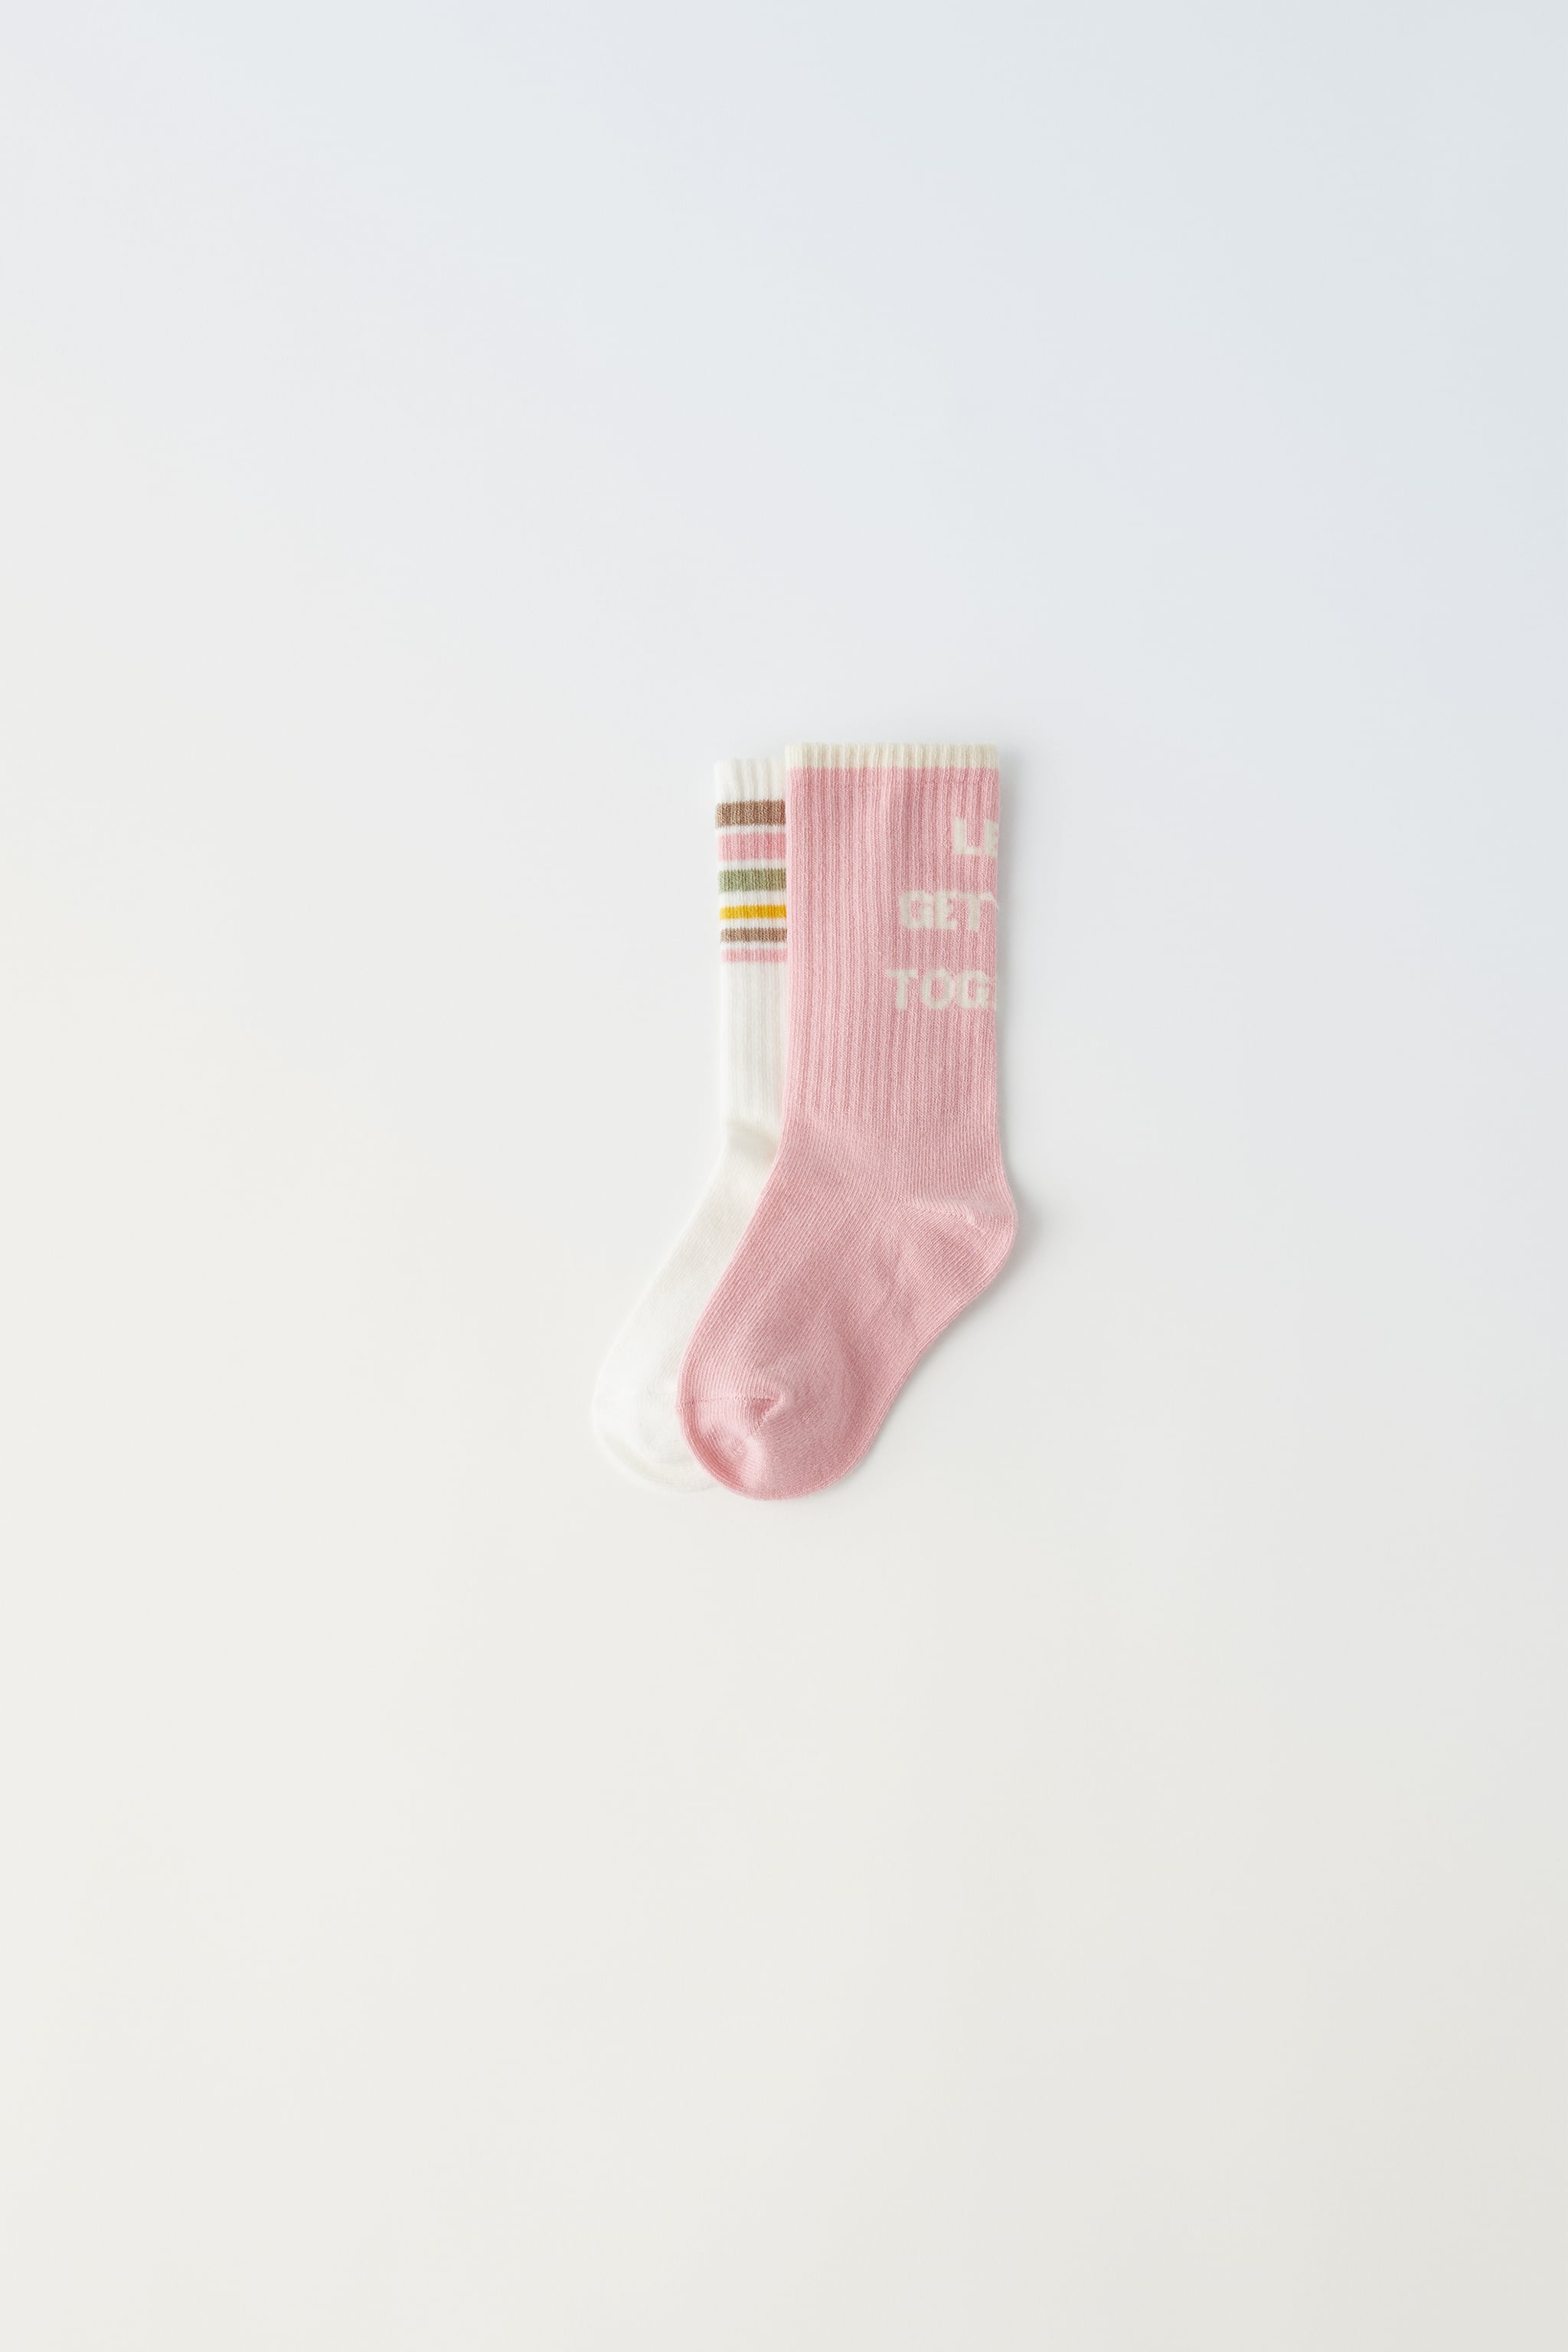 TWO-PACK OF SOCKS “GET LOST”